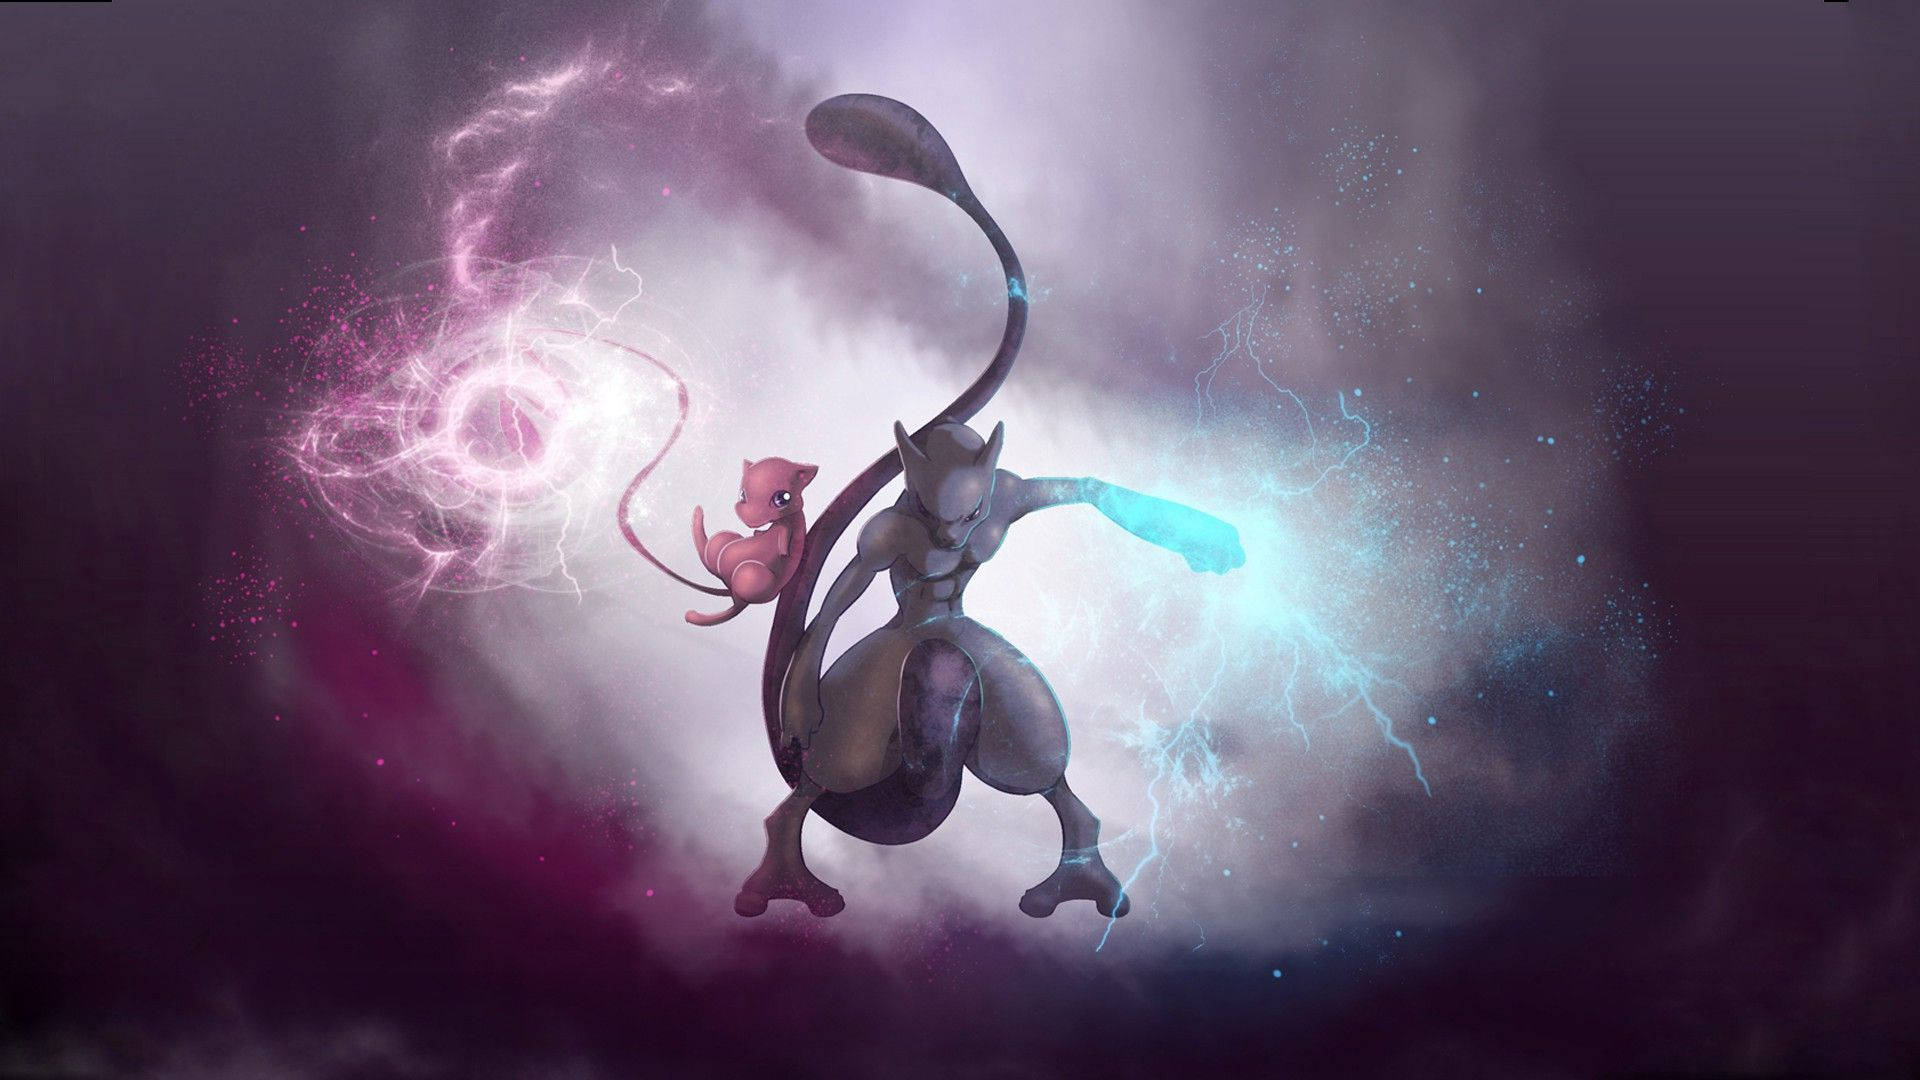 Mew And Mewtwo Team Up! Background